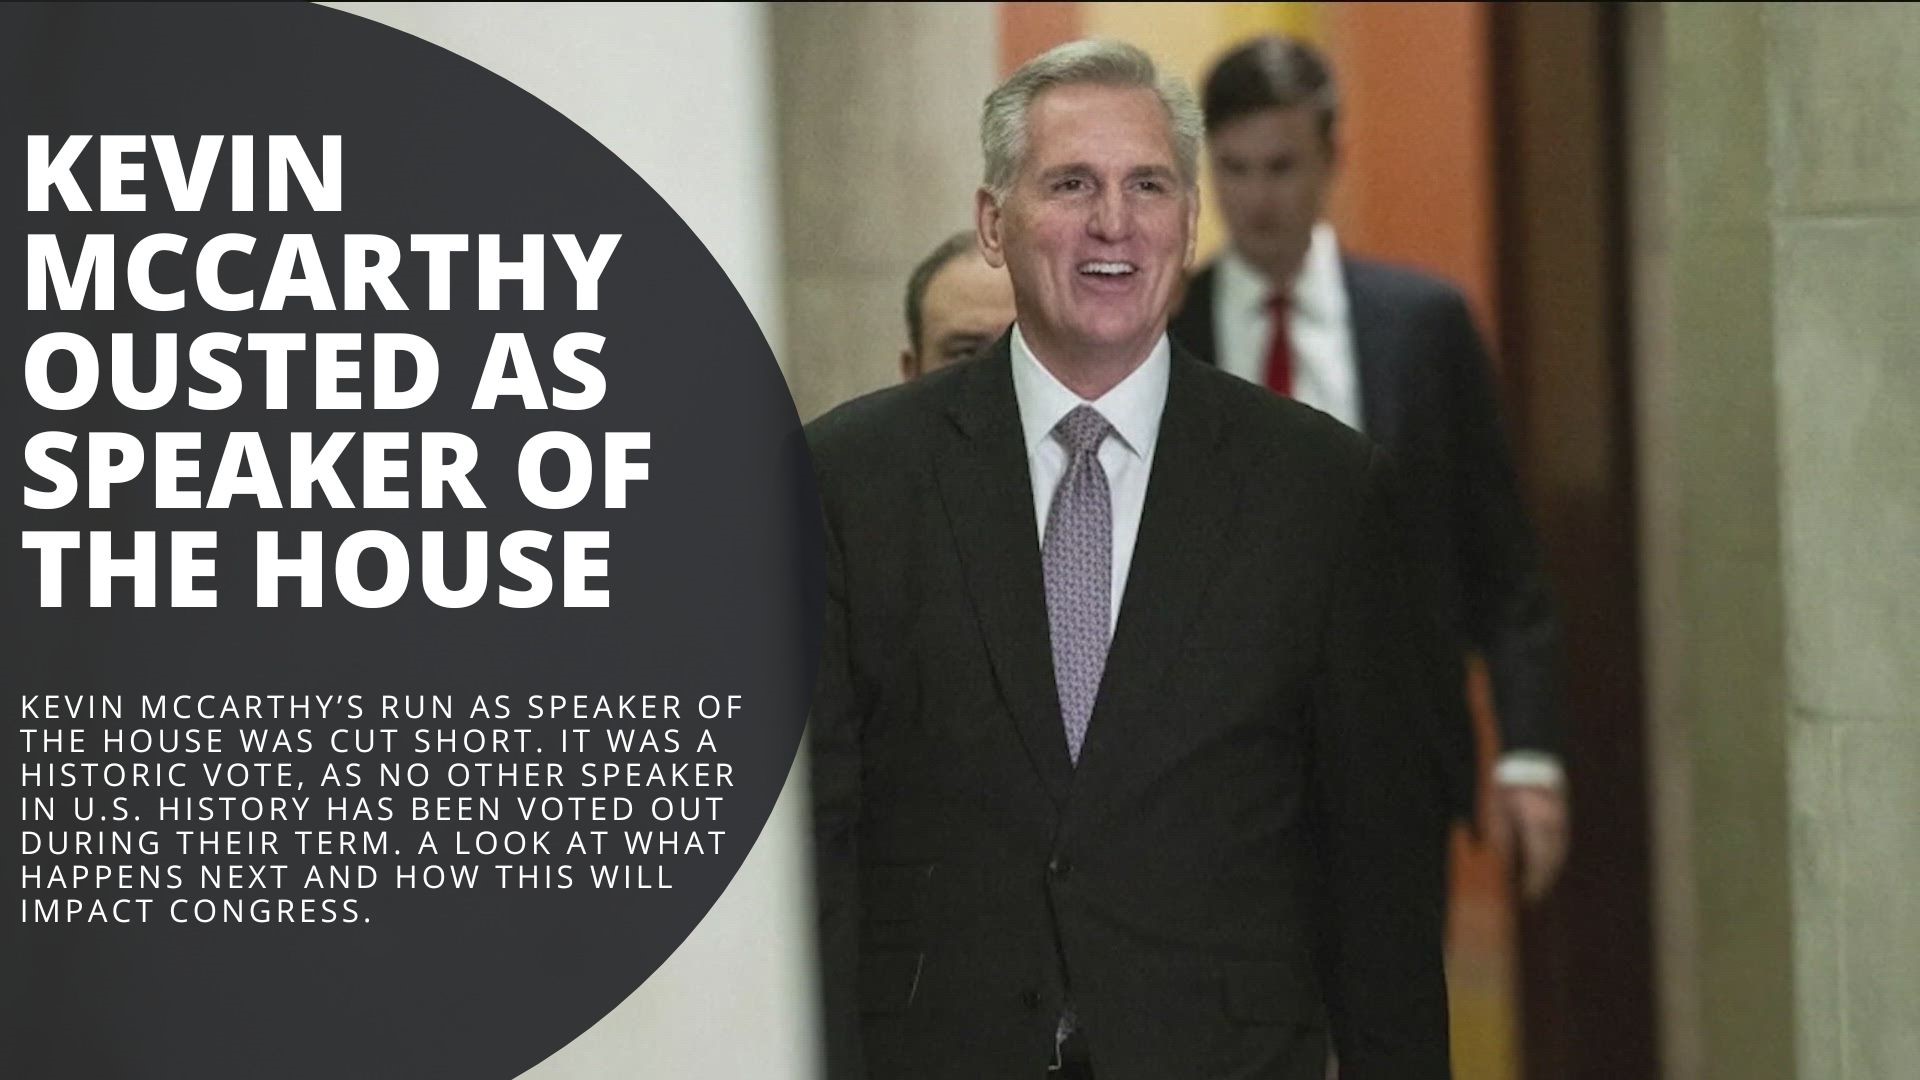 Kevin McCarthy’s run as Speaker of the House was cut short. A look at what happens next, as well as what this means for Congress and funding the government.